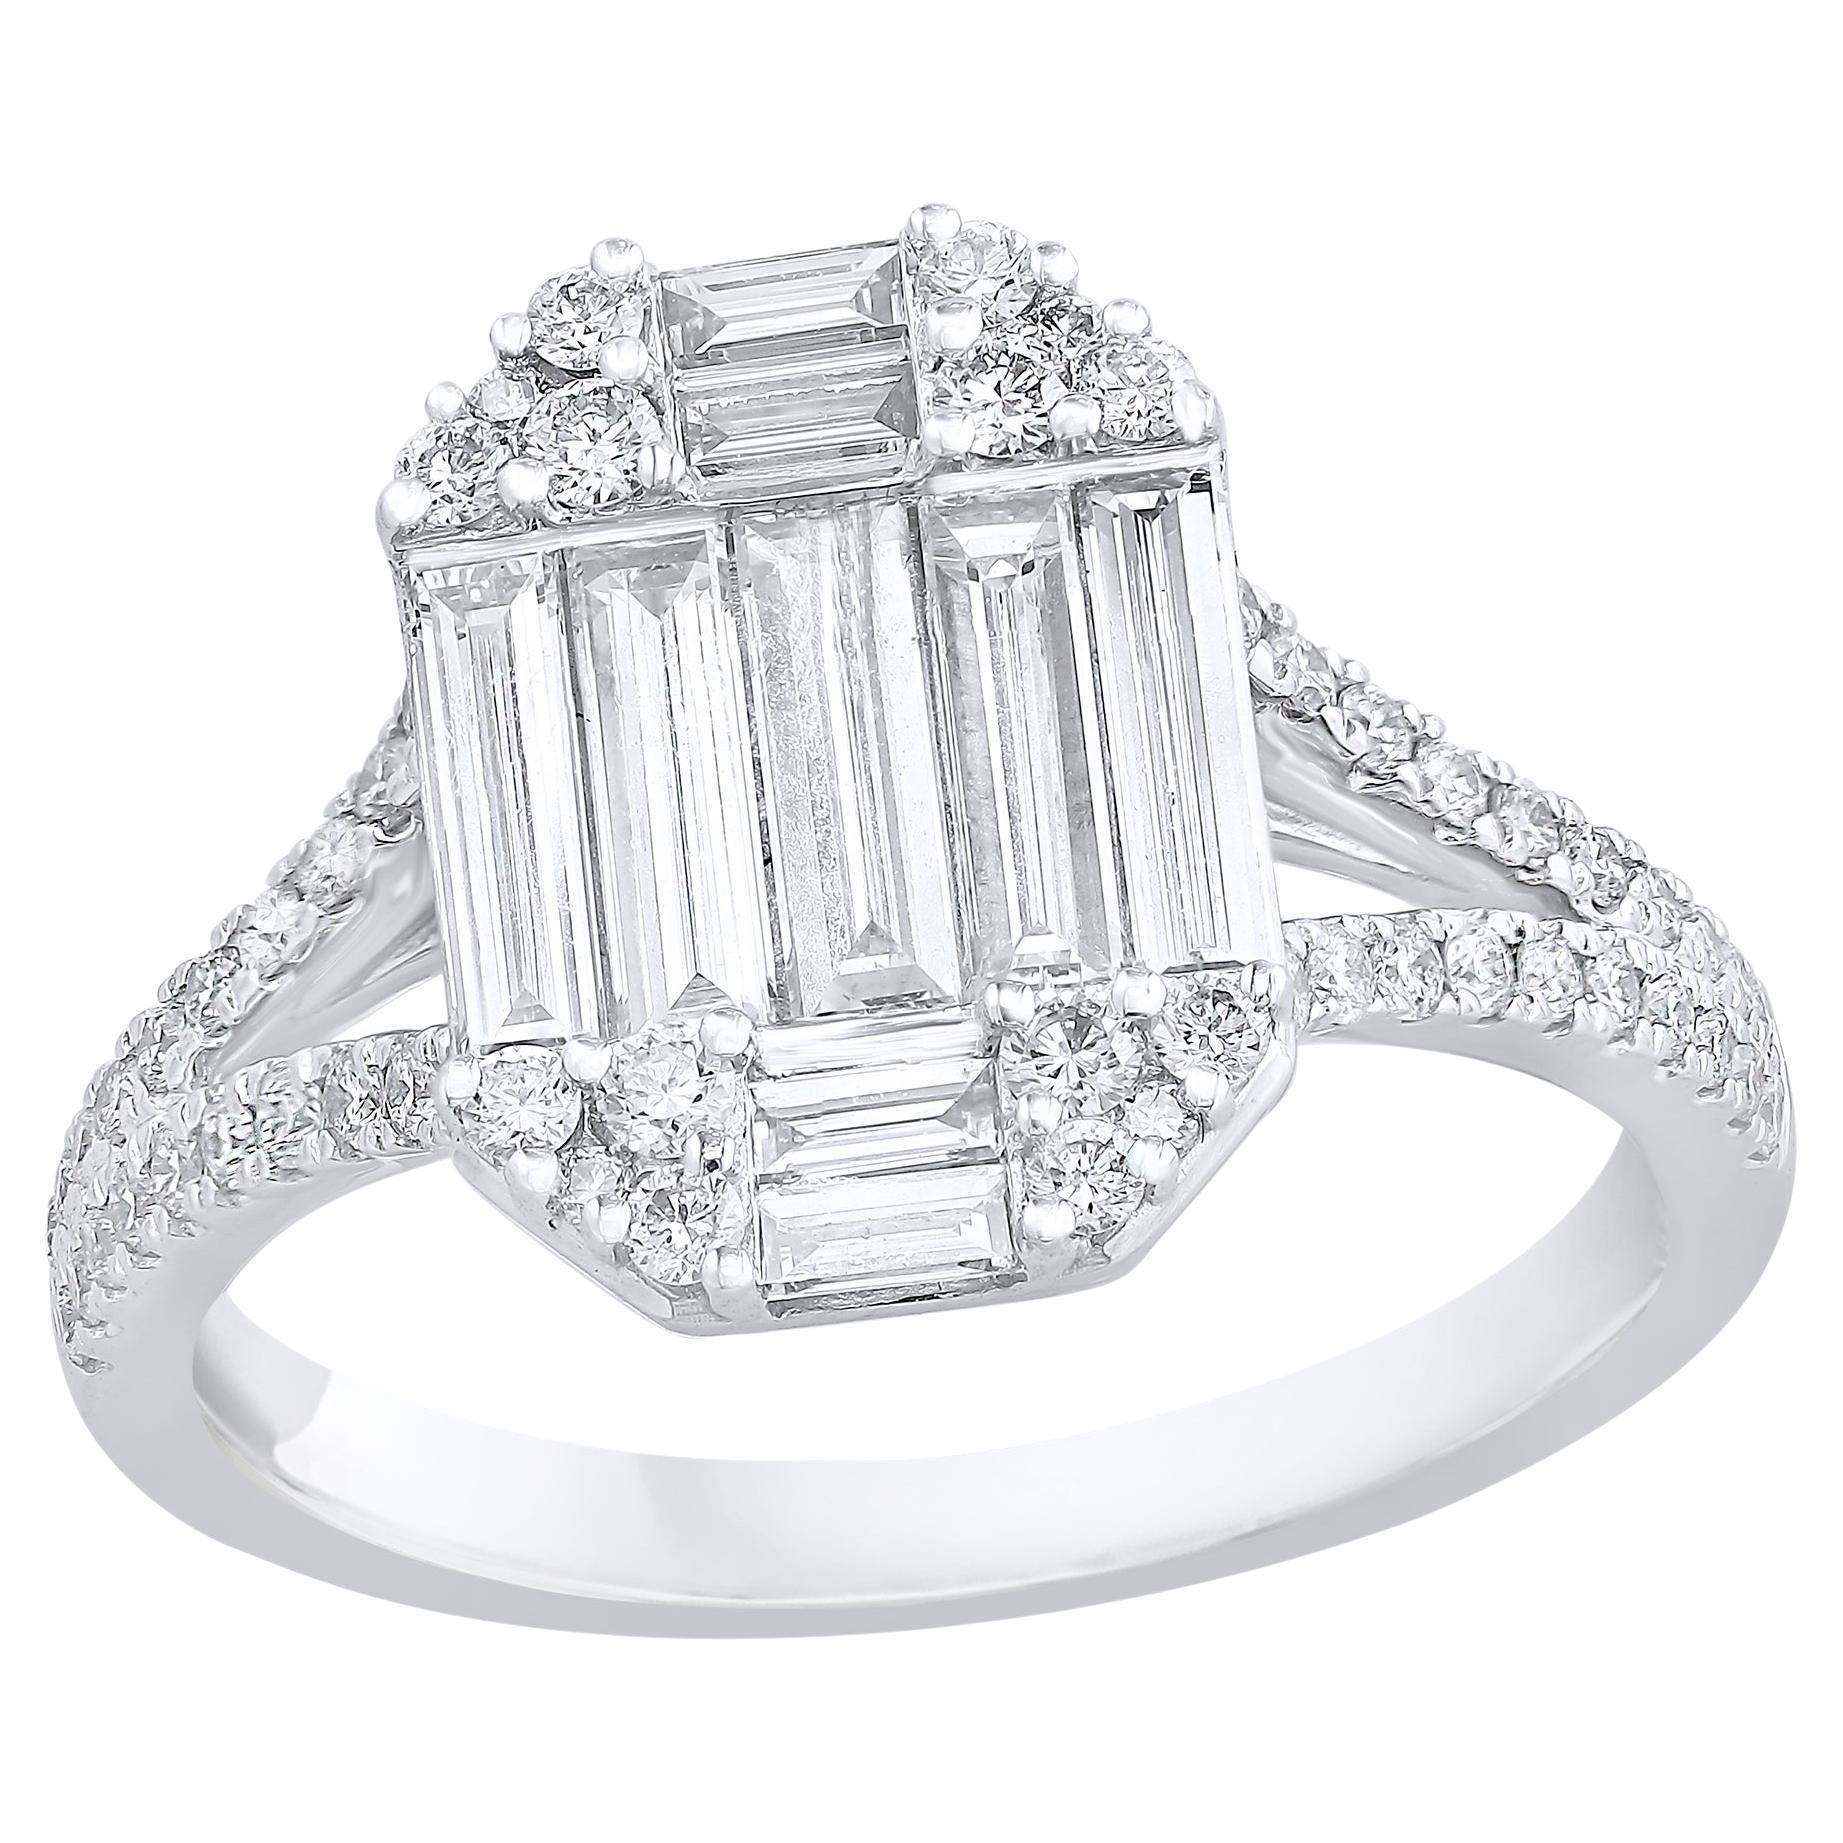 1.27 Carat Baguette Cut Diamond Engagement Ring in 18K White Gold For Sale